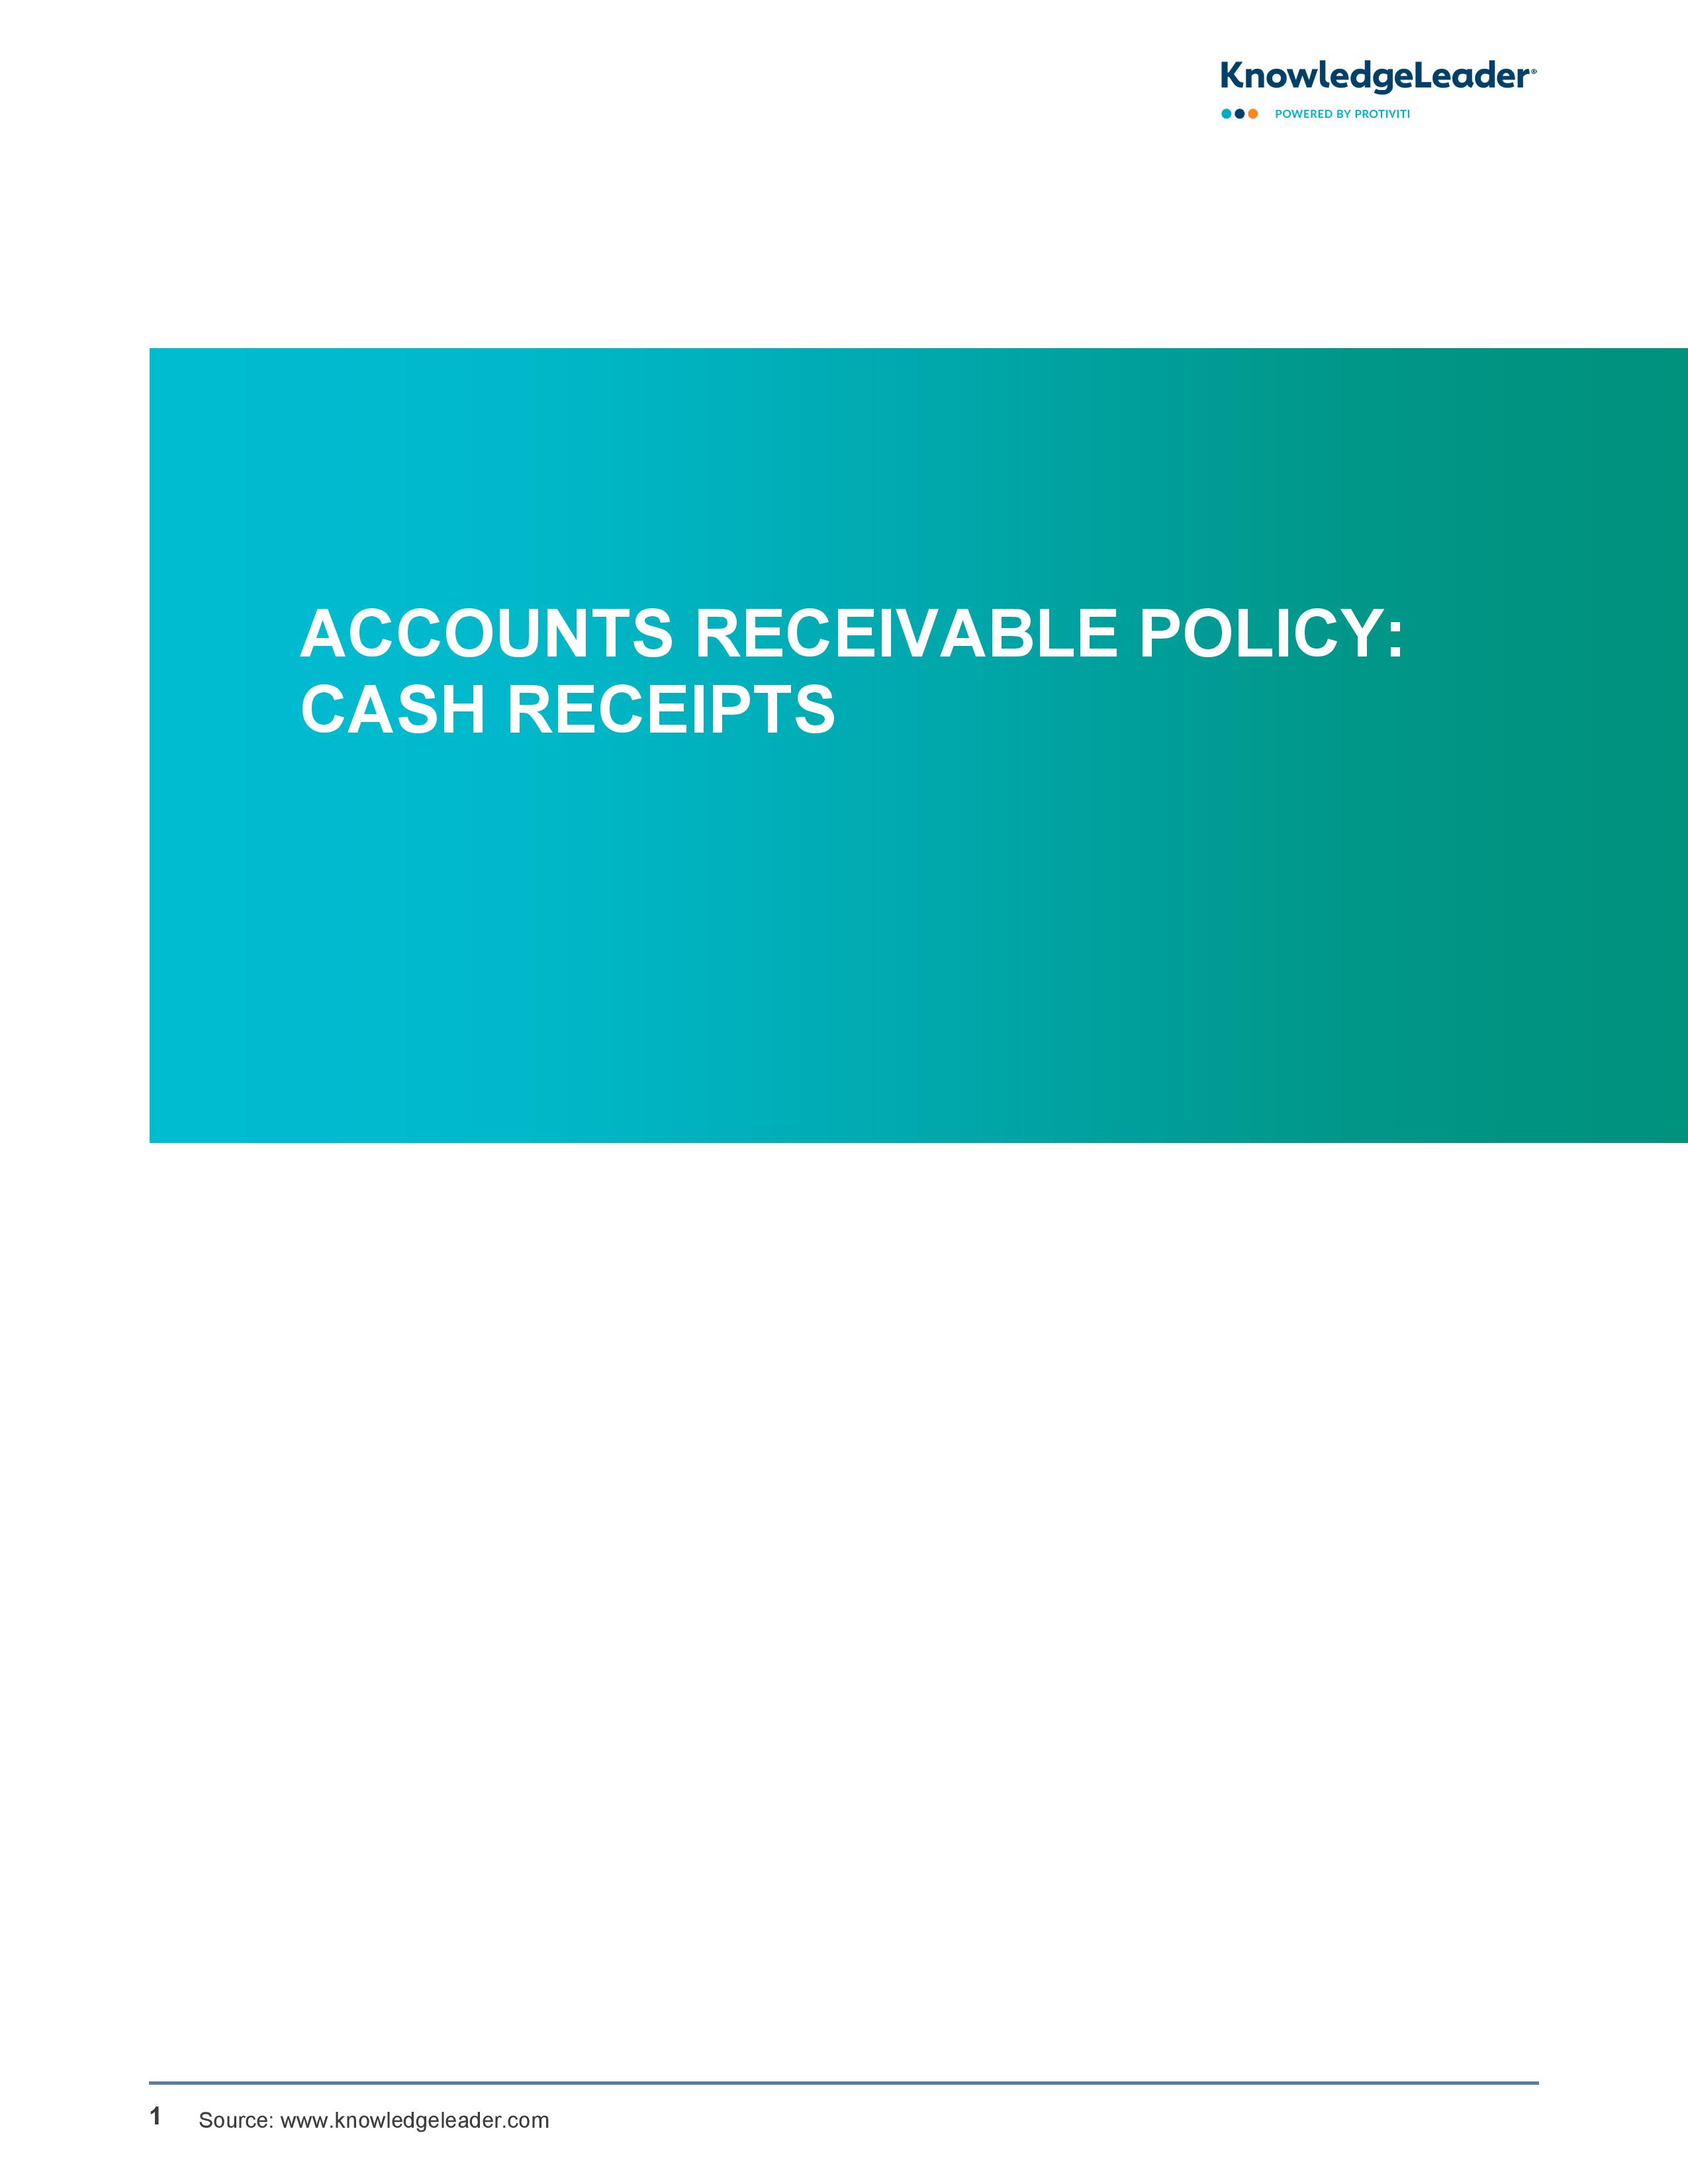 Screenshot of the first page of Accounts Receivable Policy Cash Receipts